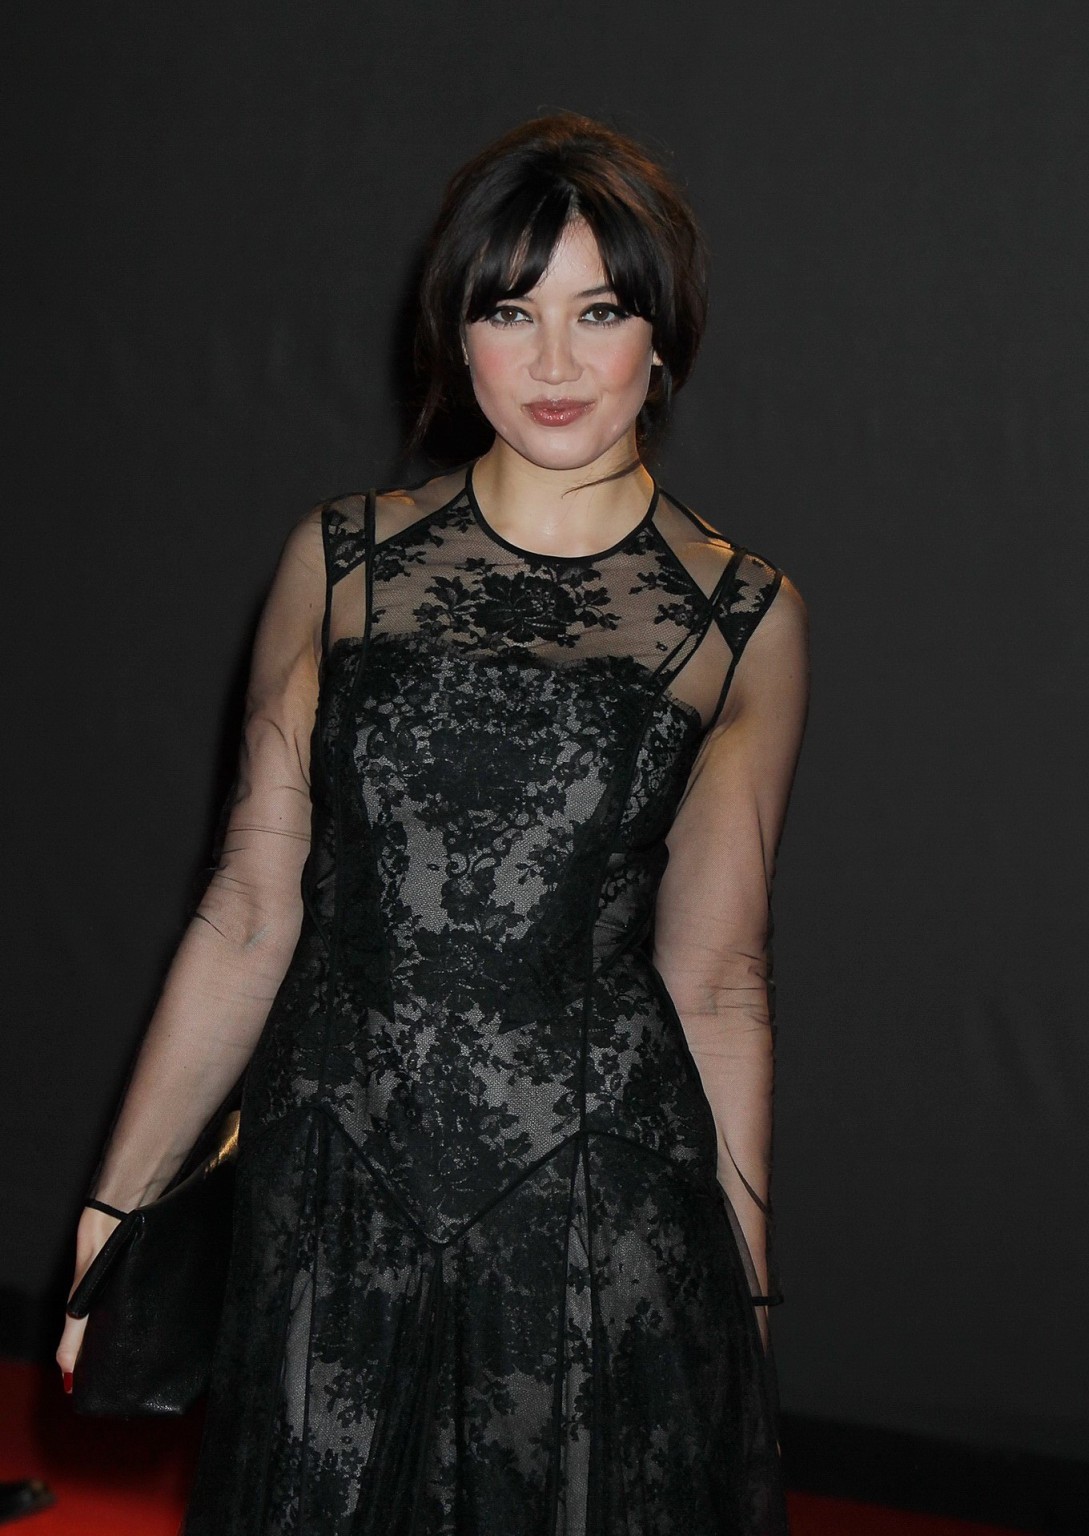 Daisy Lowe wearing black partially see-through dress at The British Fashion Awar #75211412